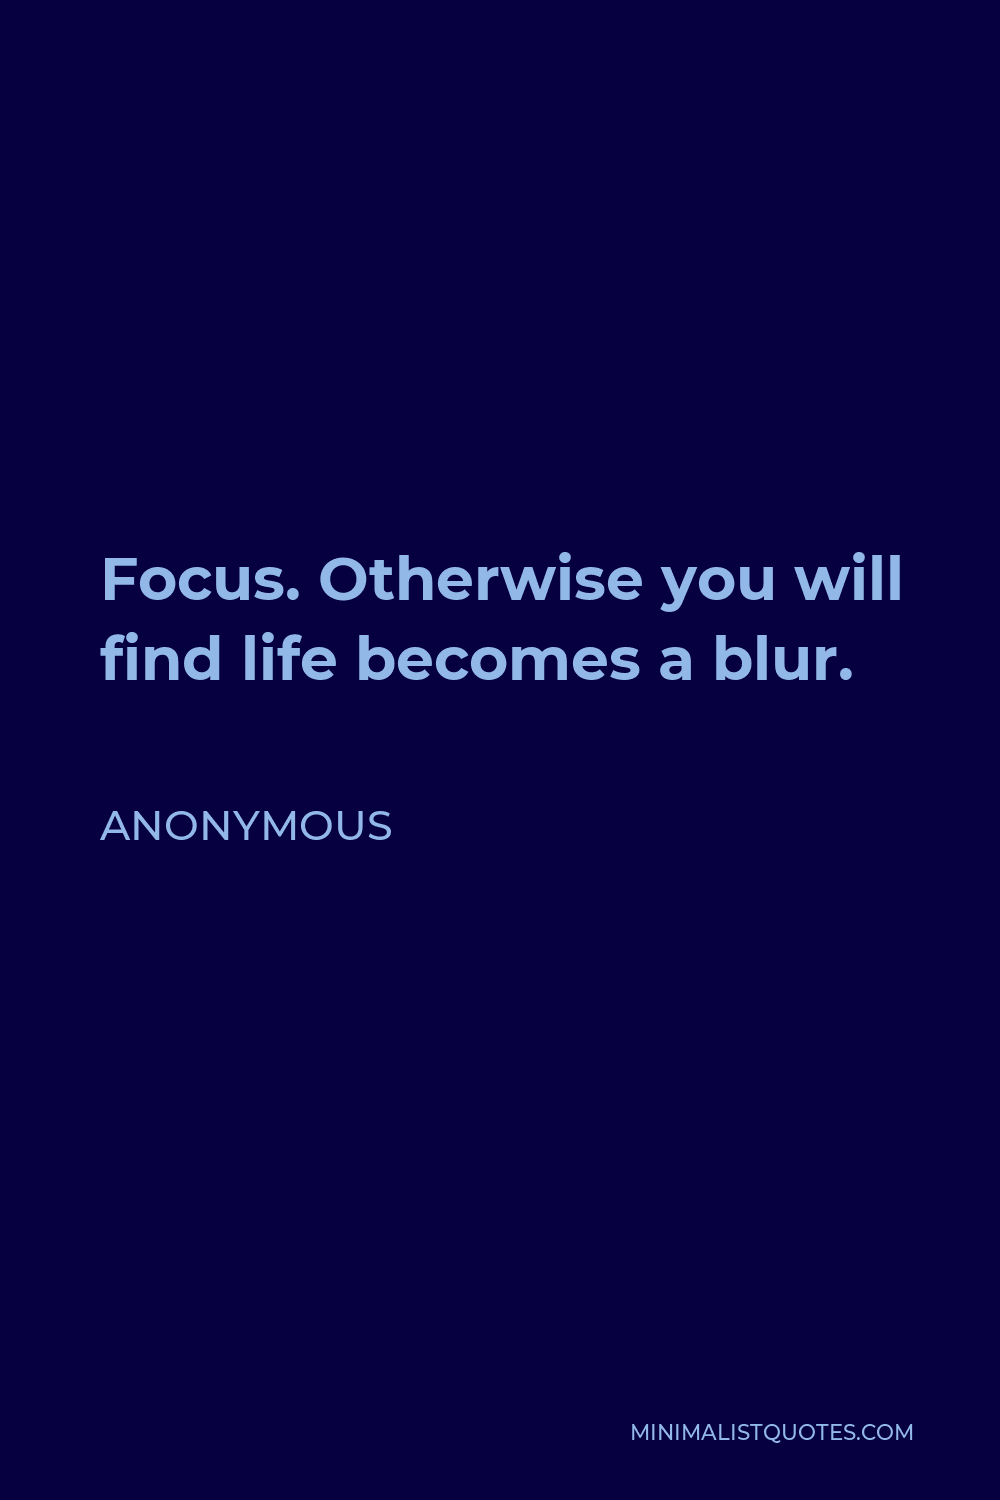 Anonymous Quote - Focus. Otherwise you will find life becomes a blur.